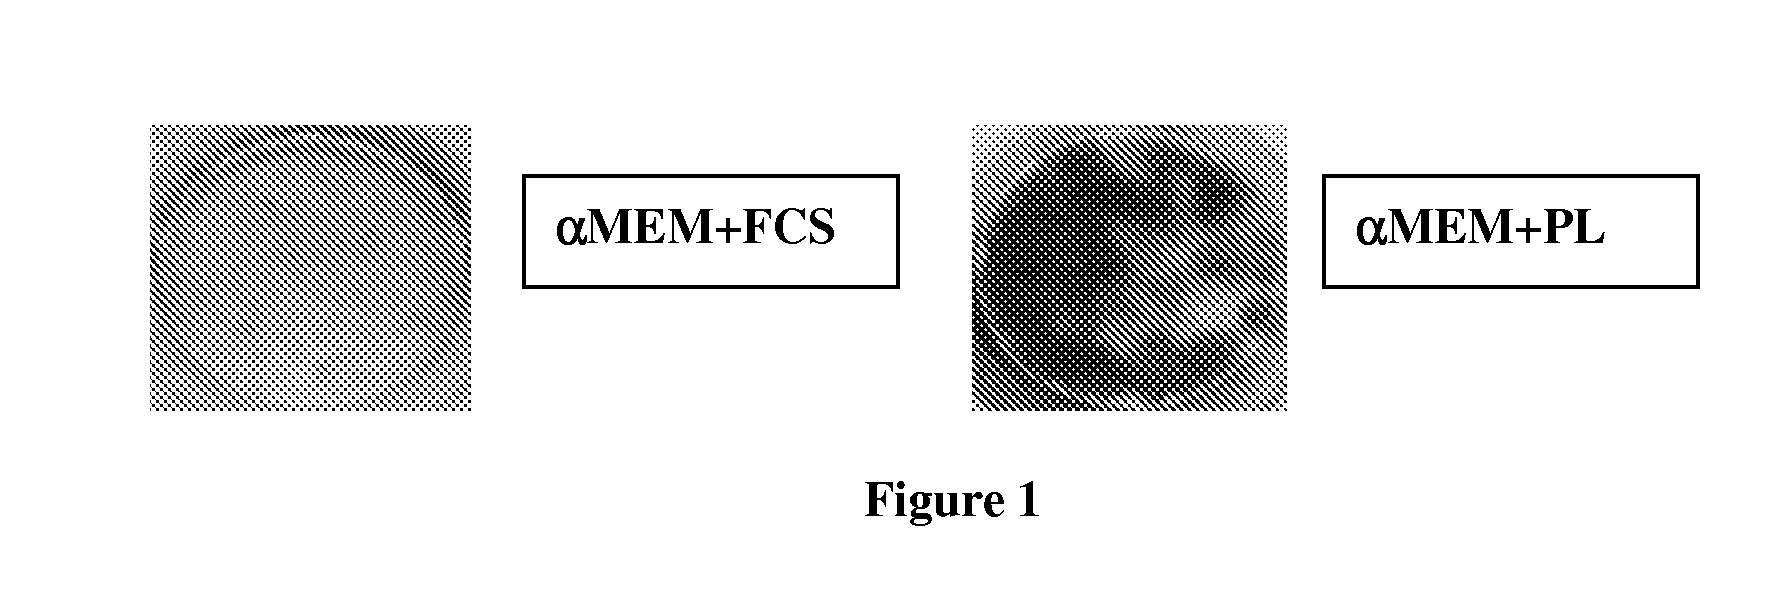 Mesenchymal stromal cell populations and methods of isolating and using same